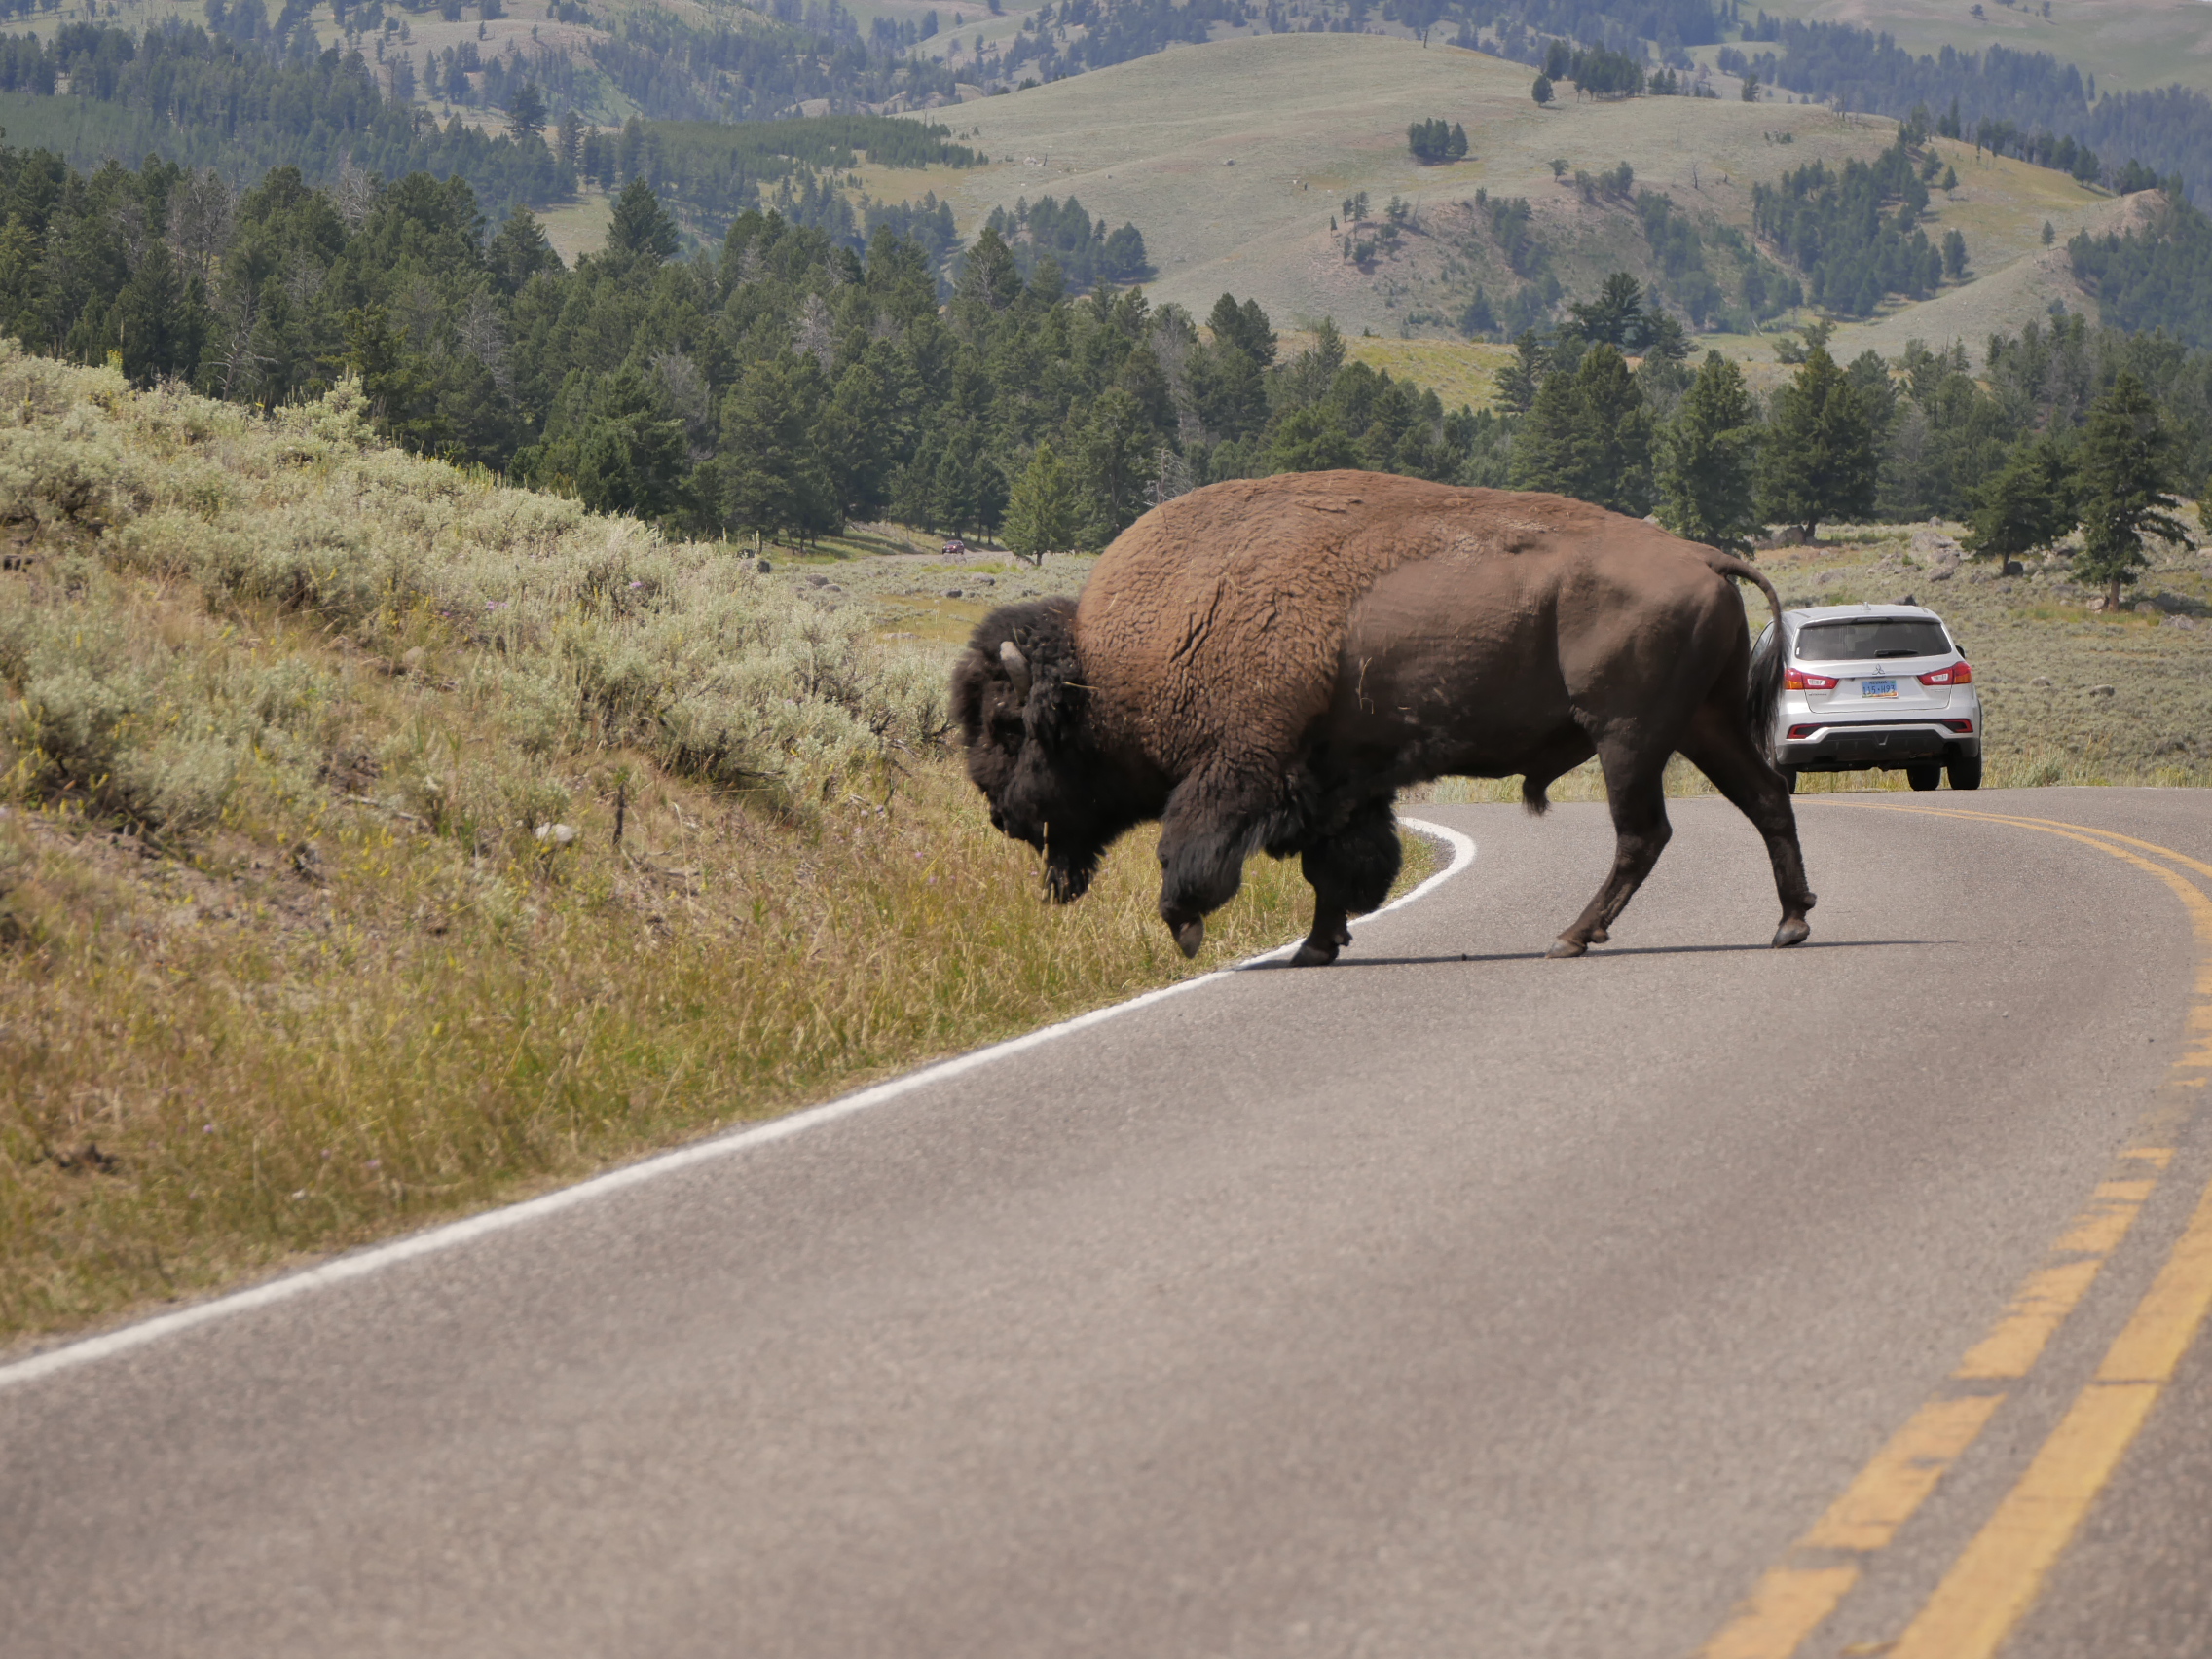 Tips when Visiting Yellowstone National Park